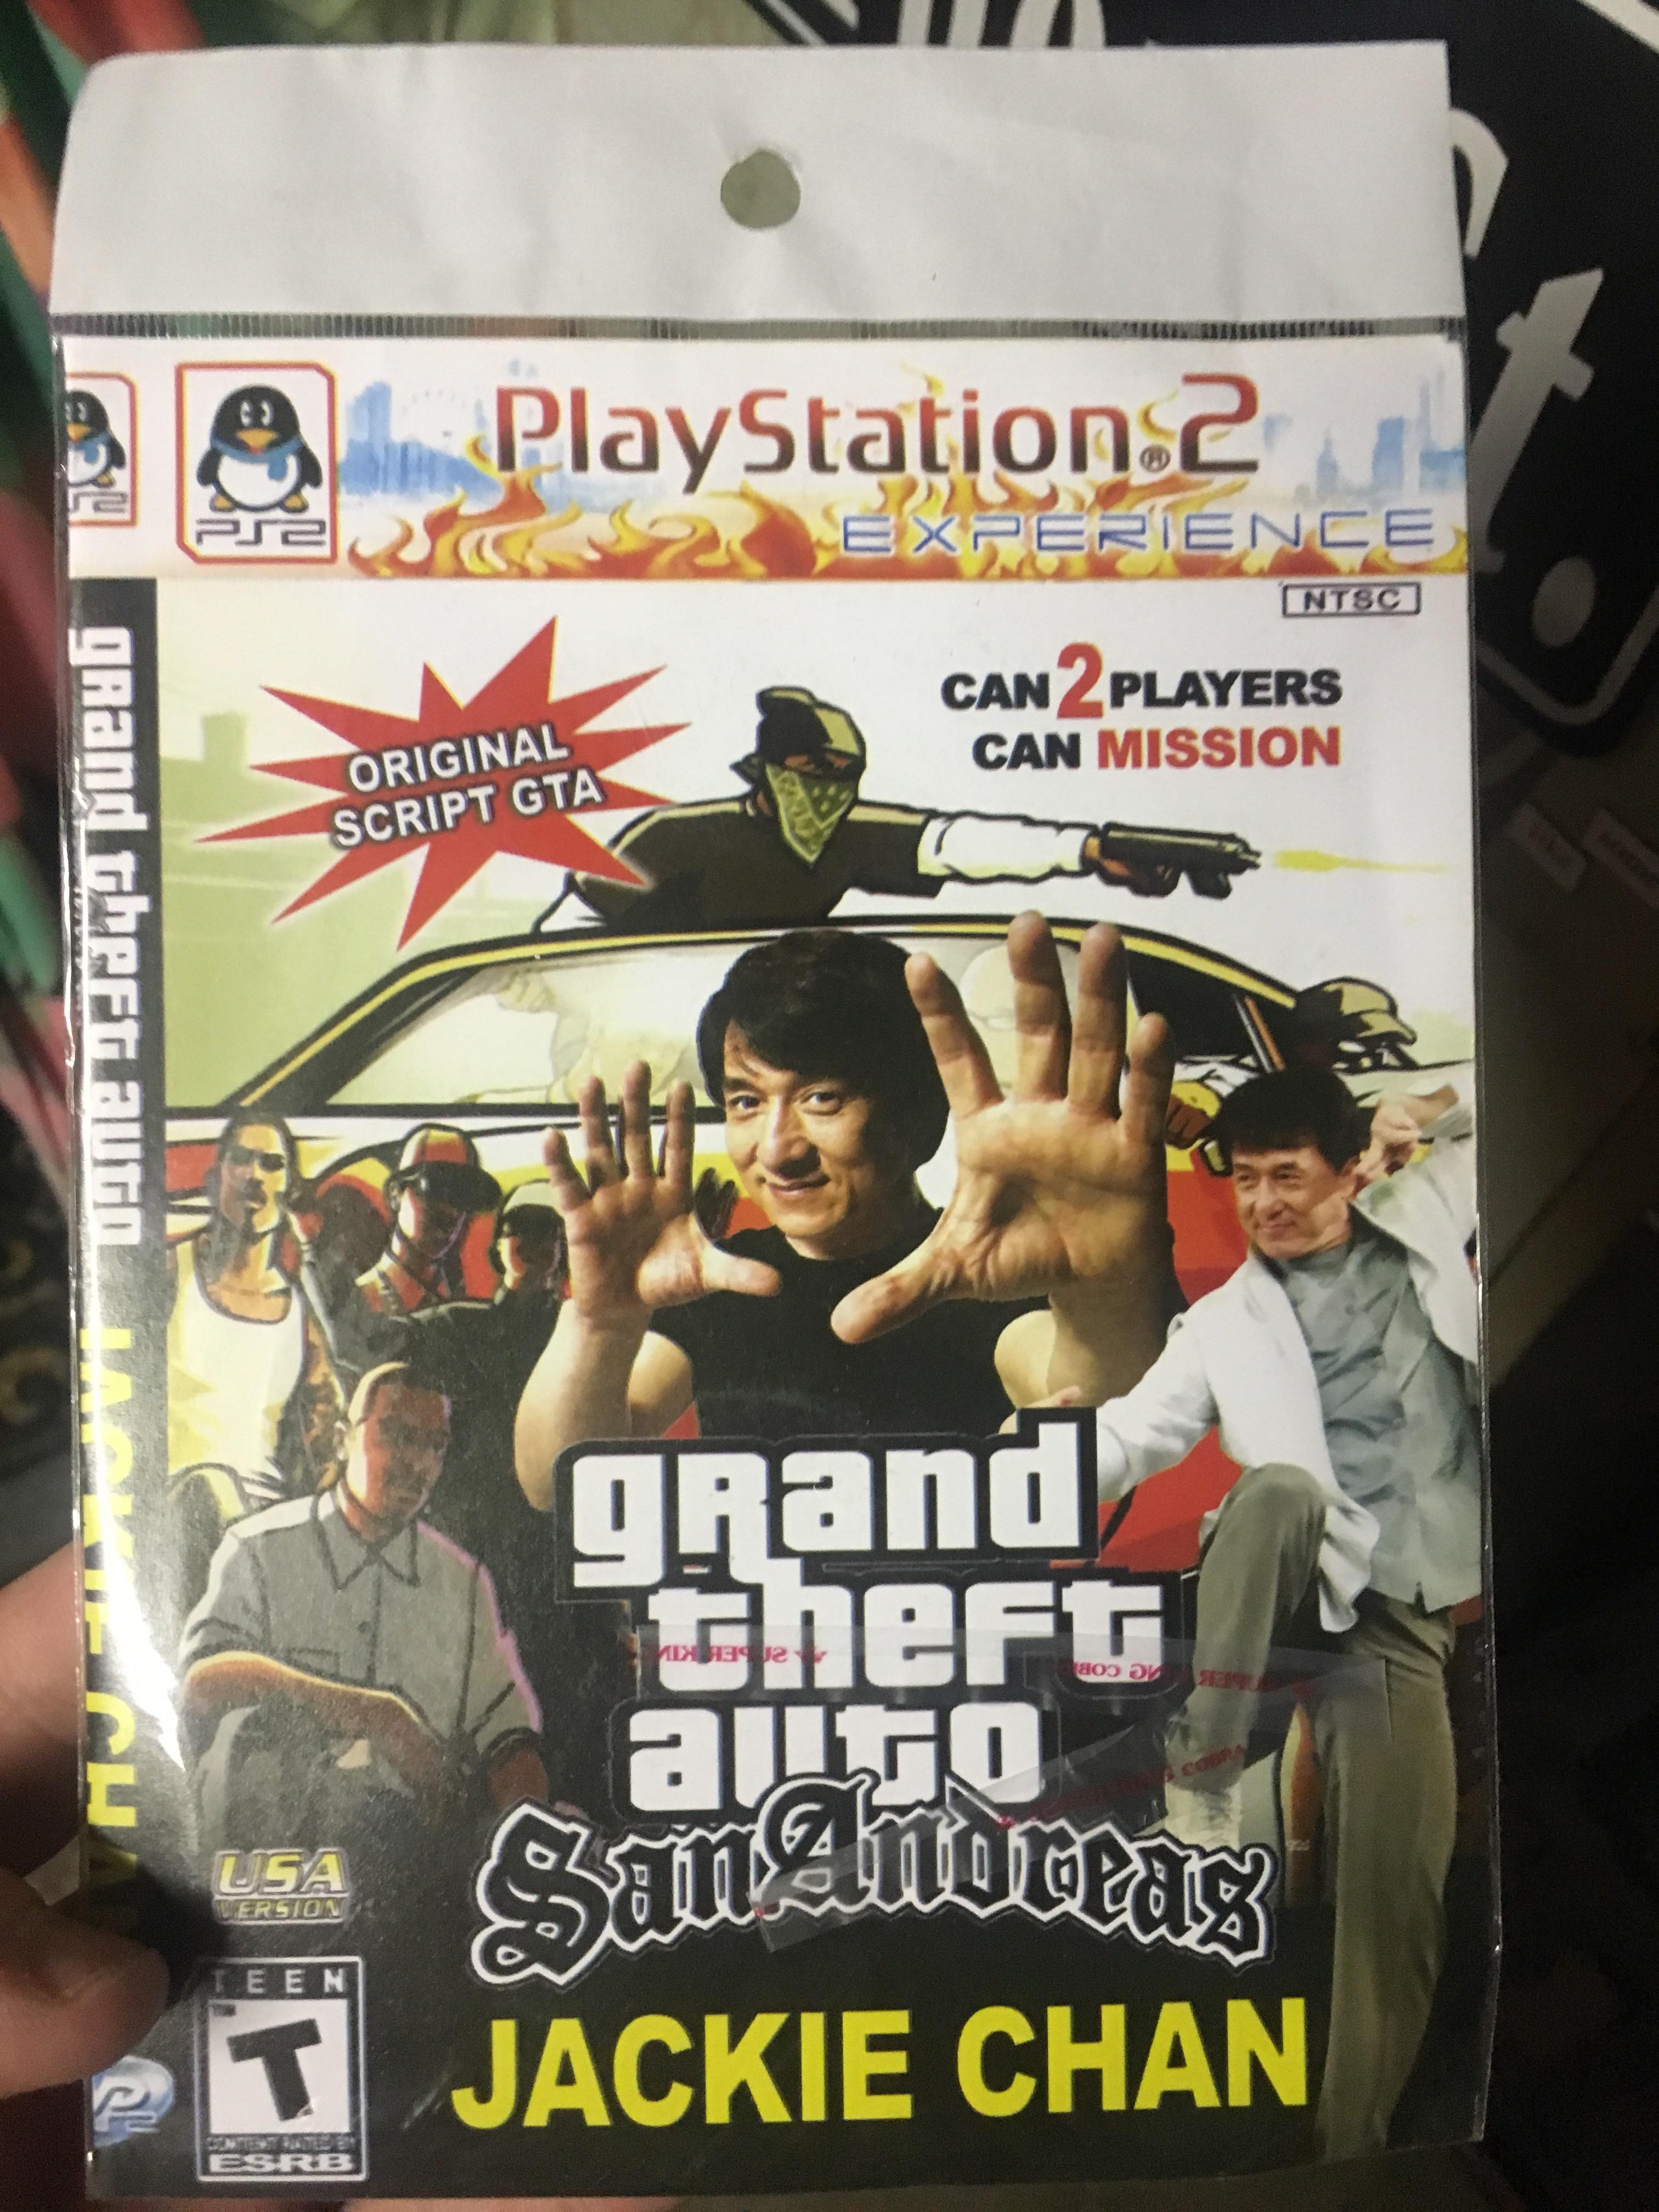 Someone bought a bootleg San Andreas in Bali